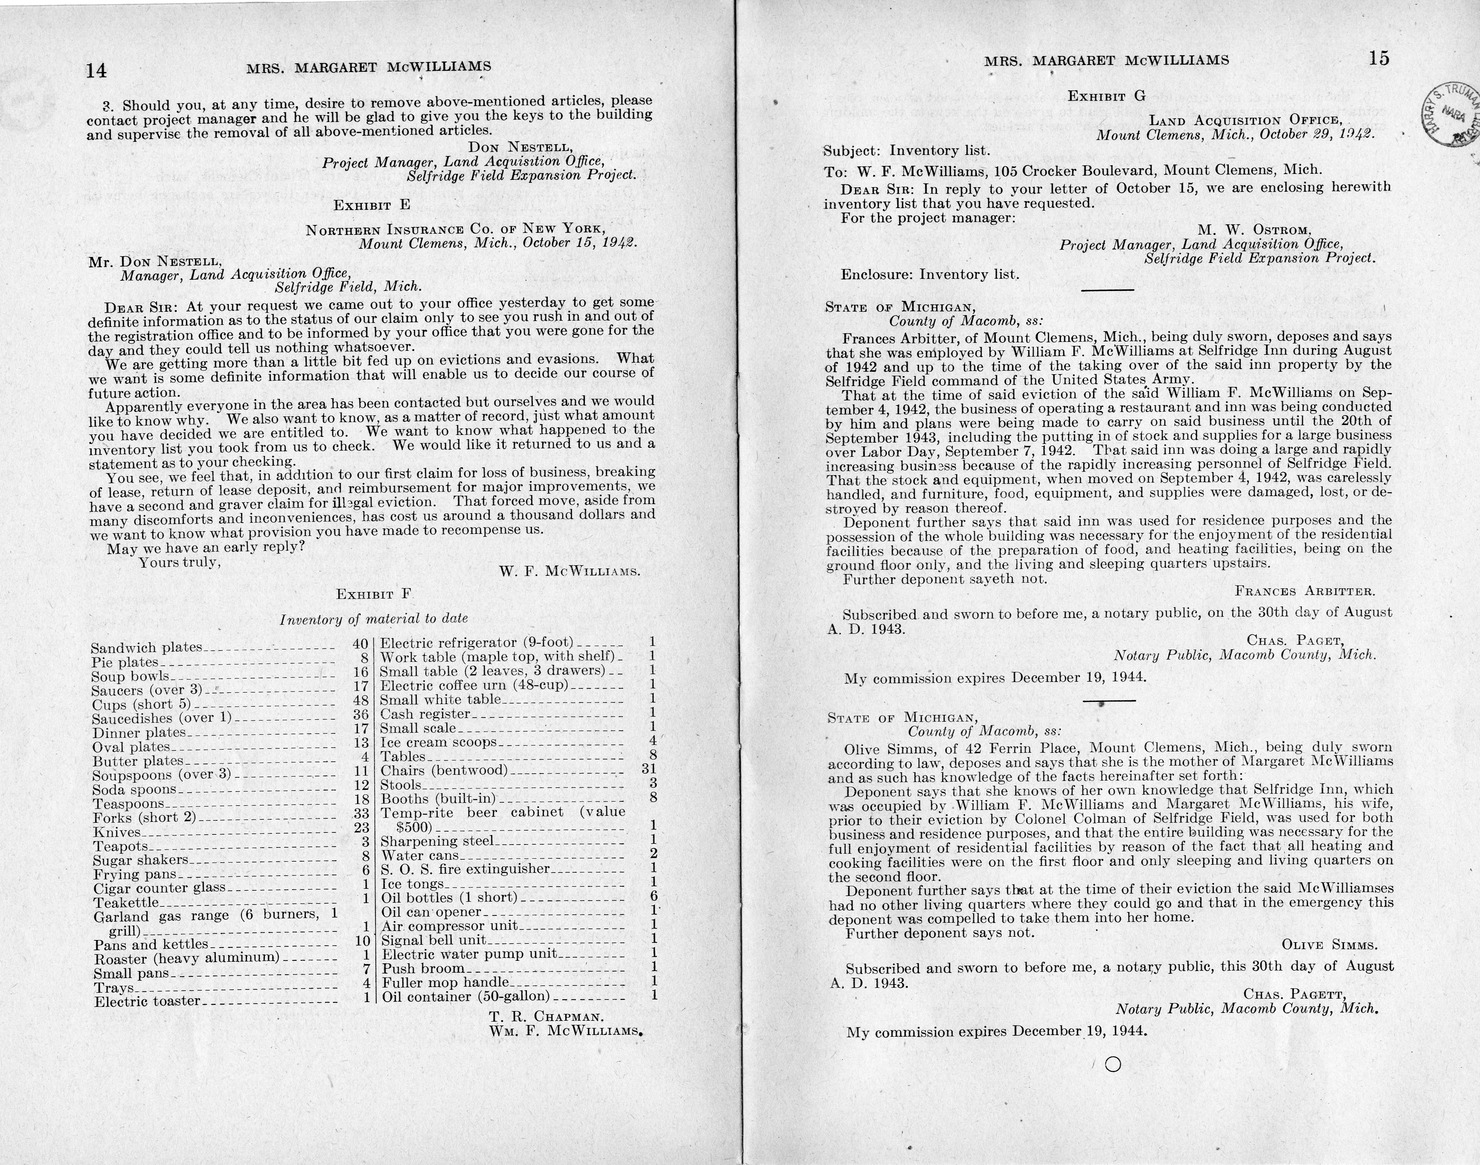 Memorandum from Frederick J. Bailey to M. C. Latta, H. R. 1090, For the Relief of Mrs. Margaret McWilliams, with Attachments